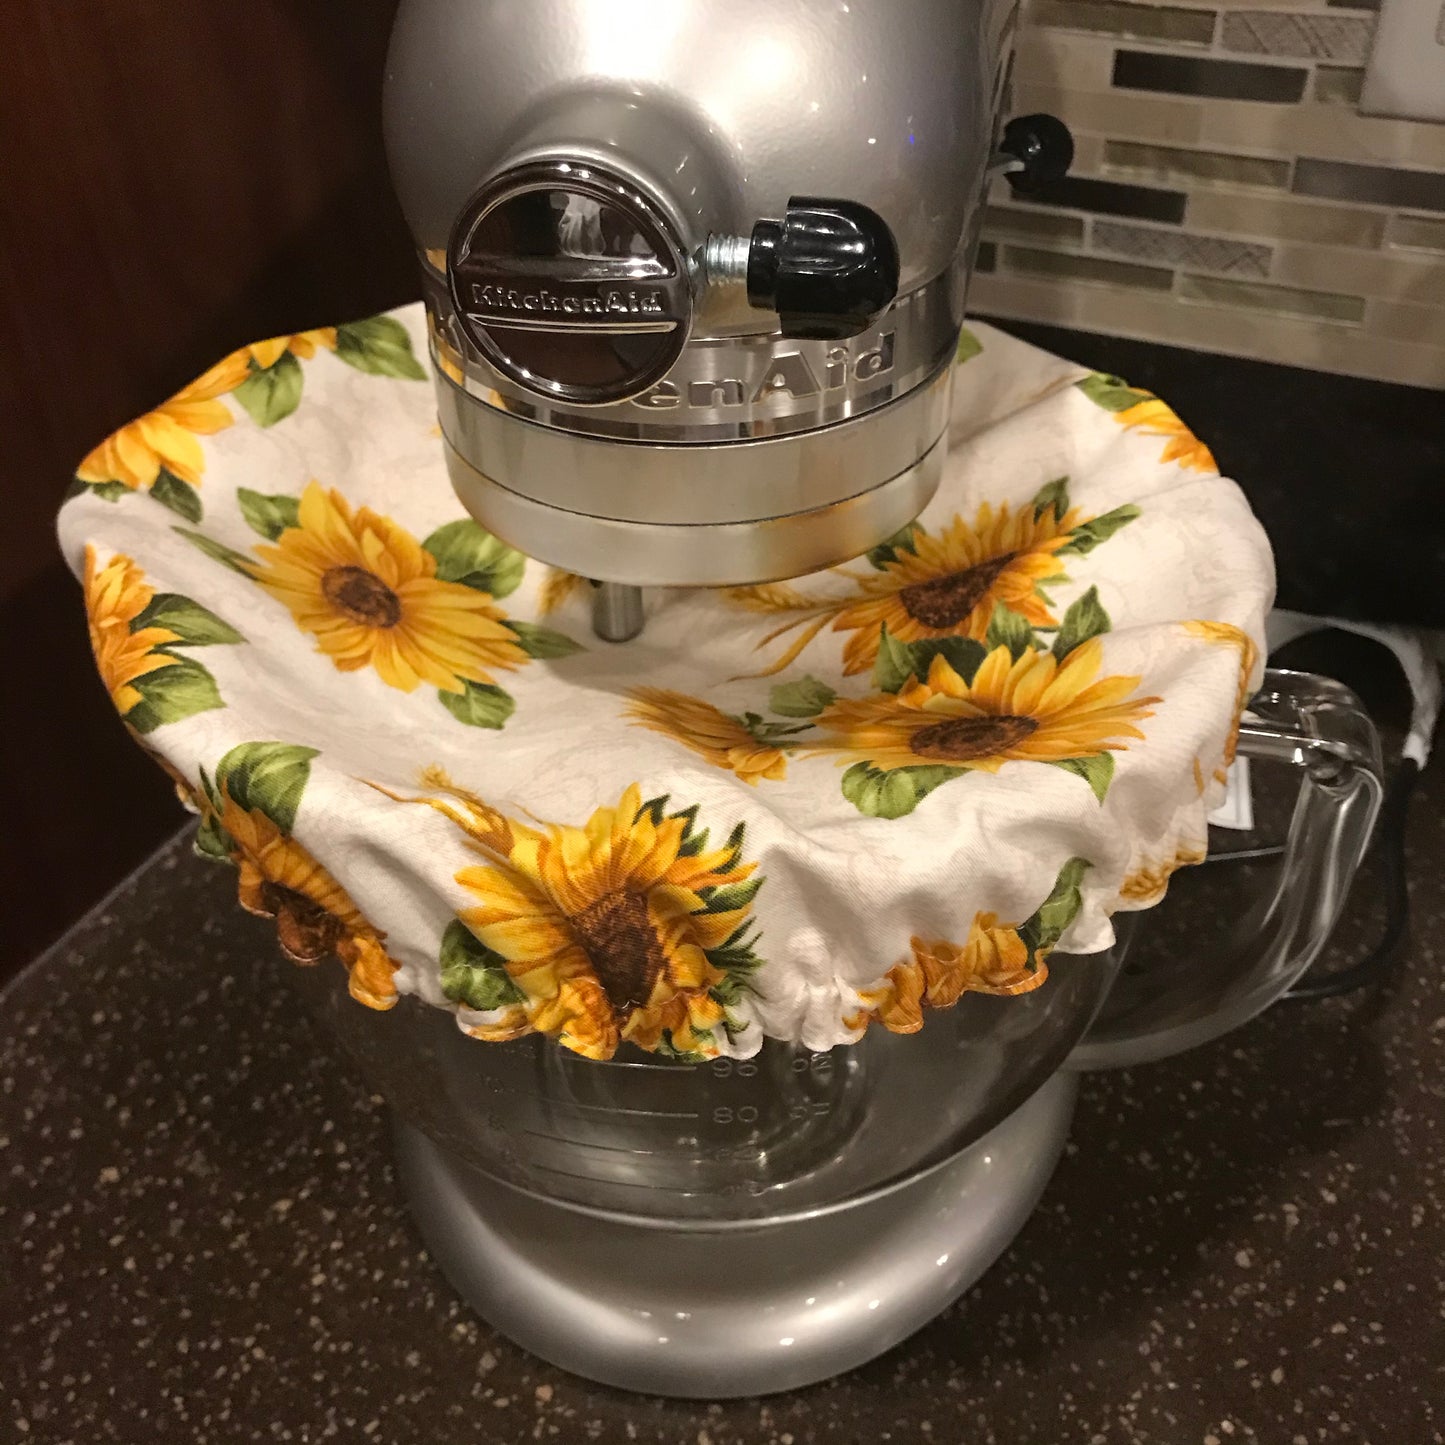 Stand Mixer Bowl Covers - Sunny Sunflowers